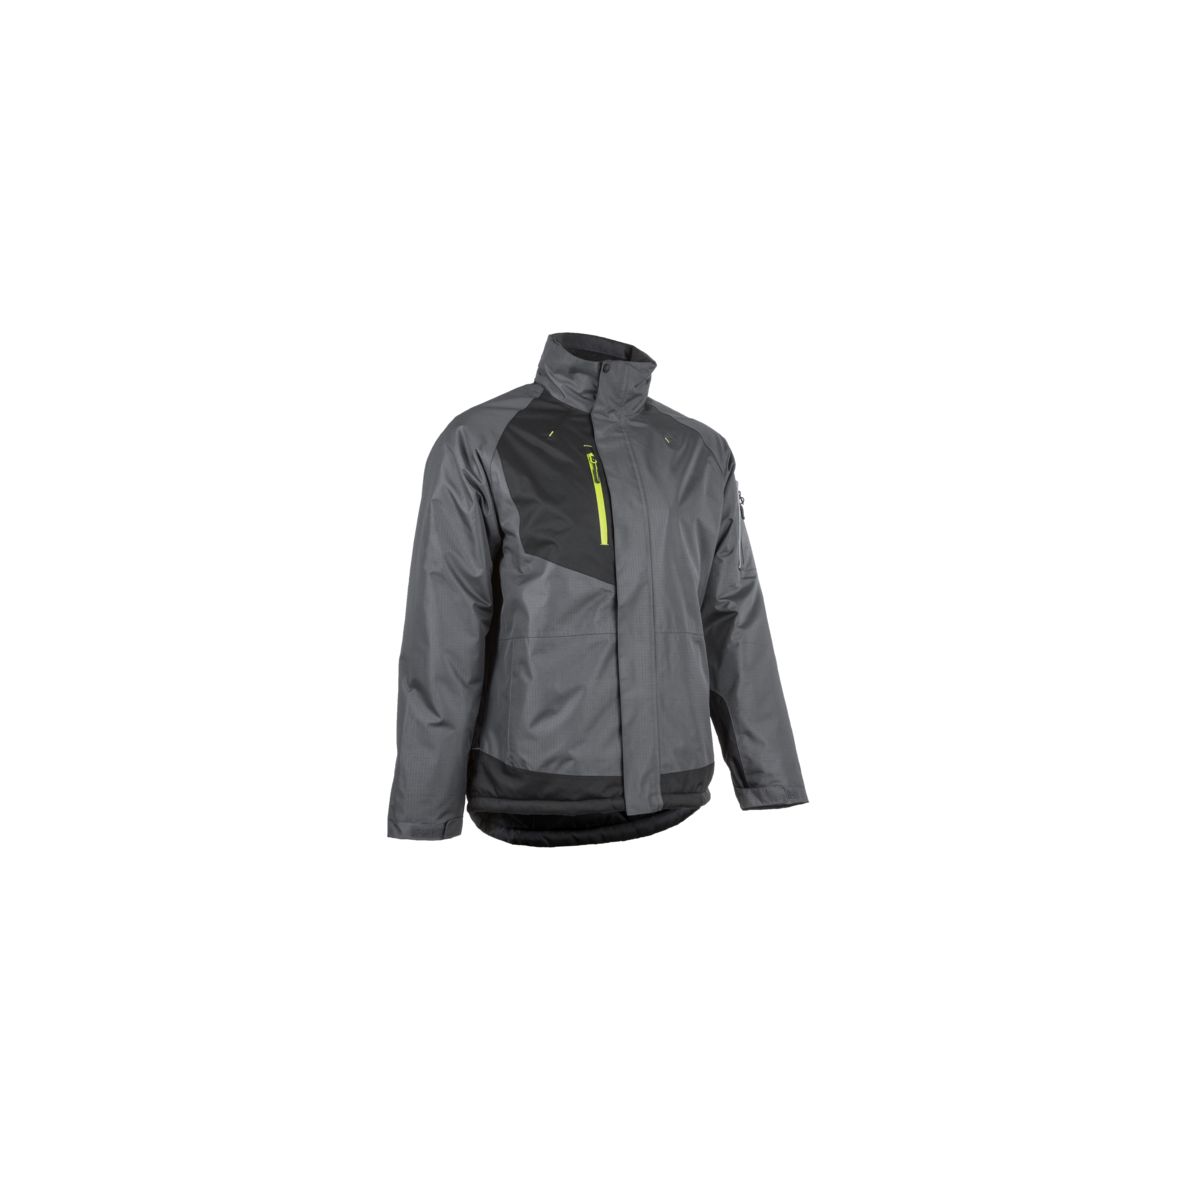 YUZU Parka anthracite/noir, Polyester Ripstop + Polaire 300g/m² - COVERGUARD - Taille M 0